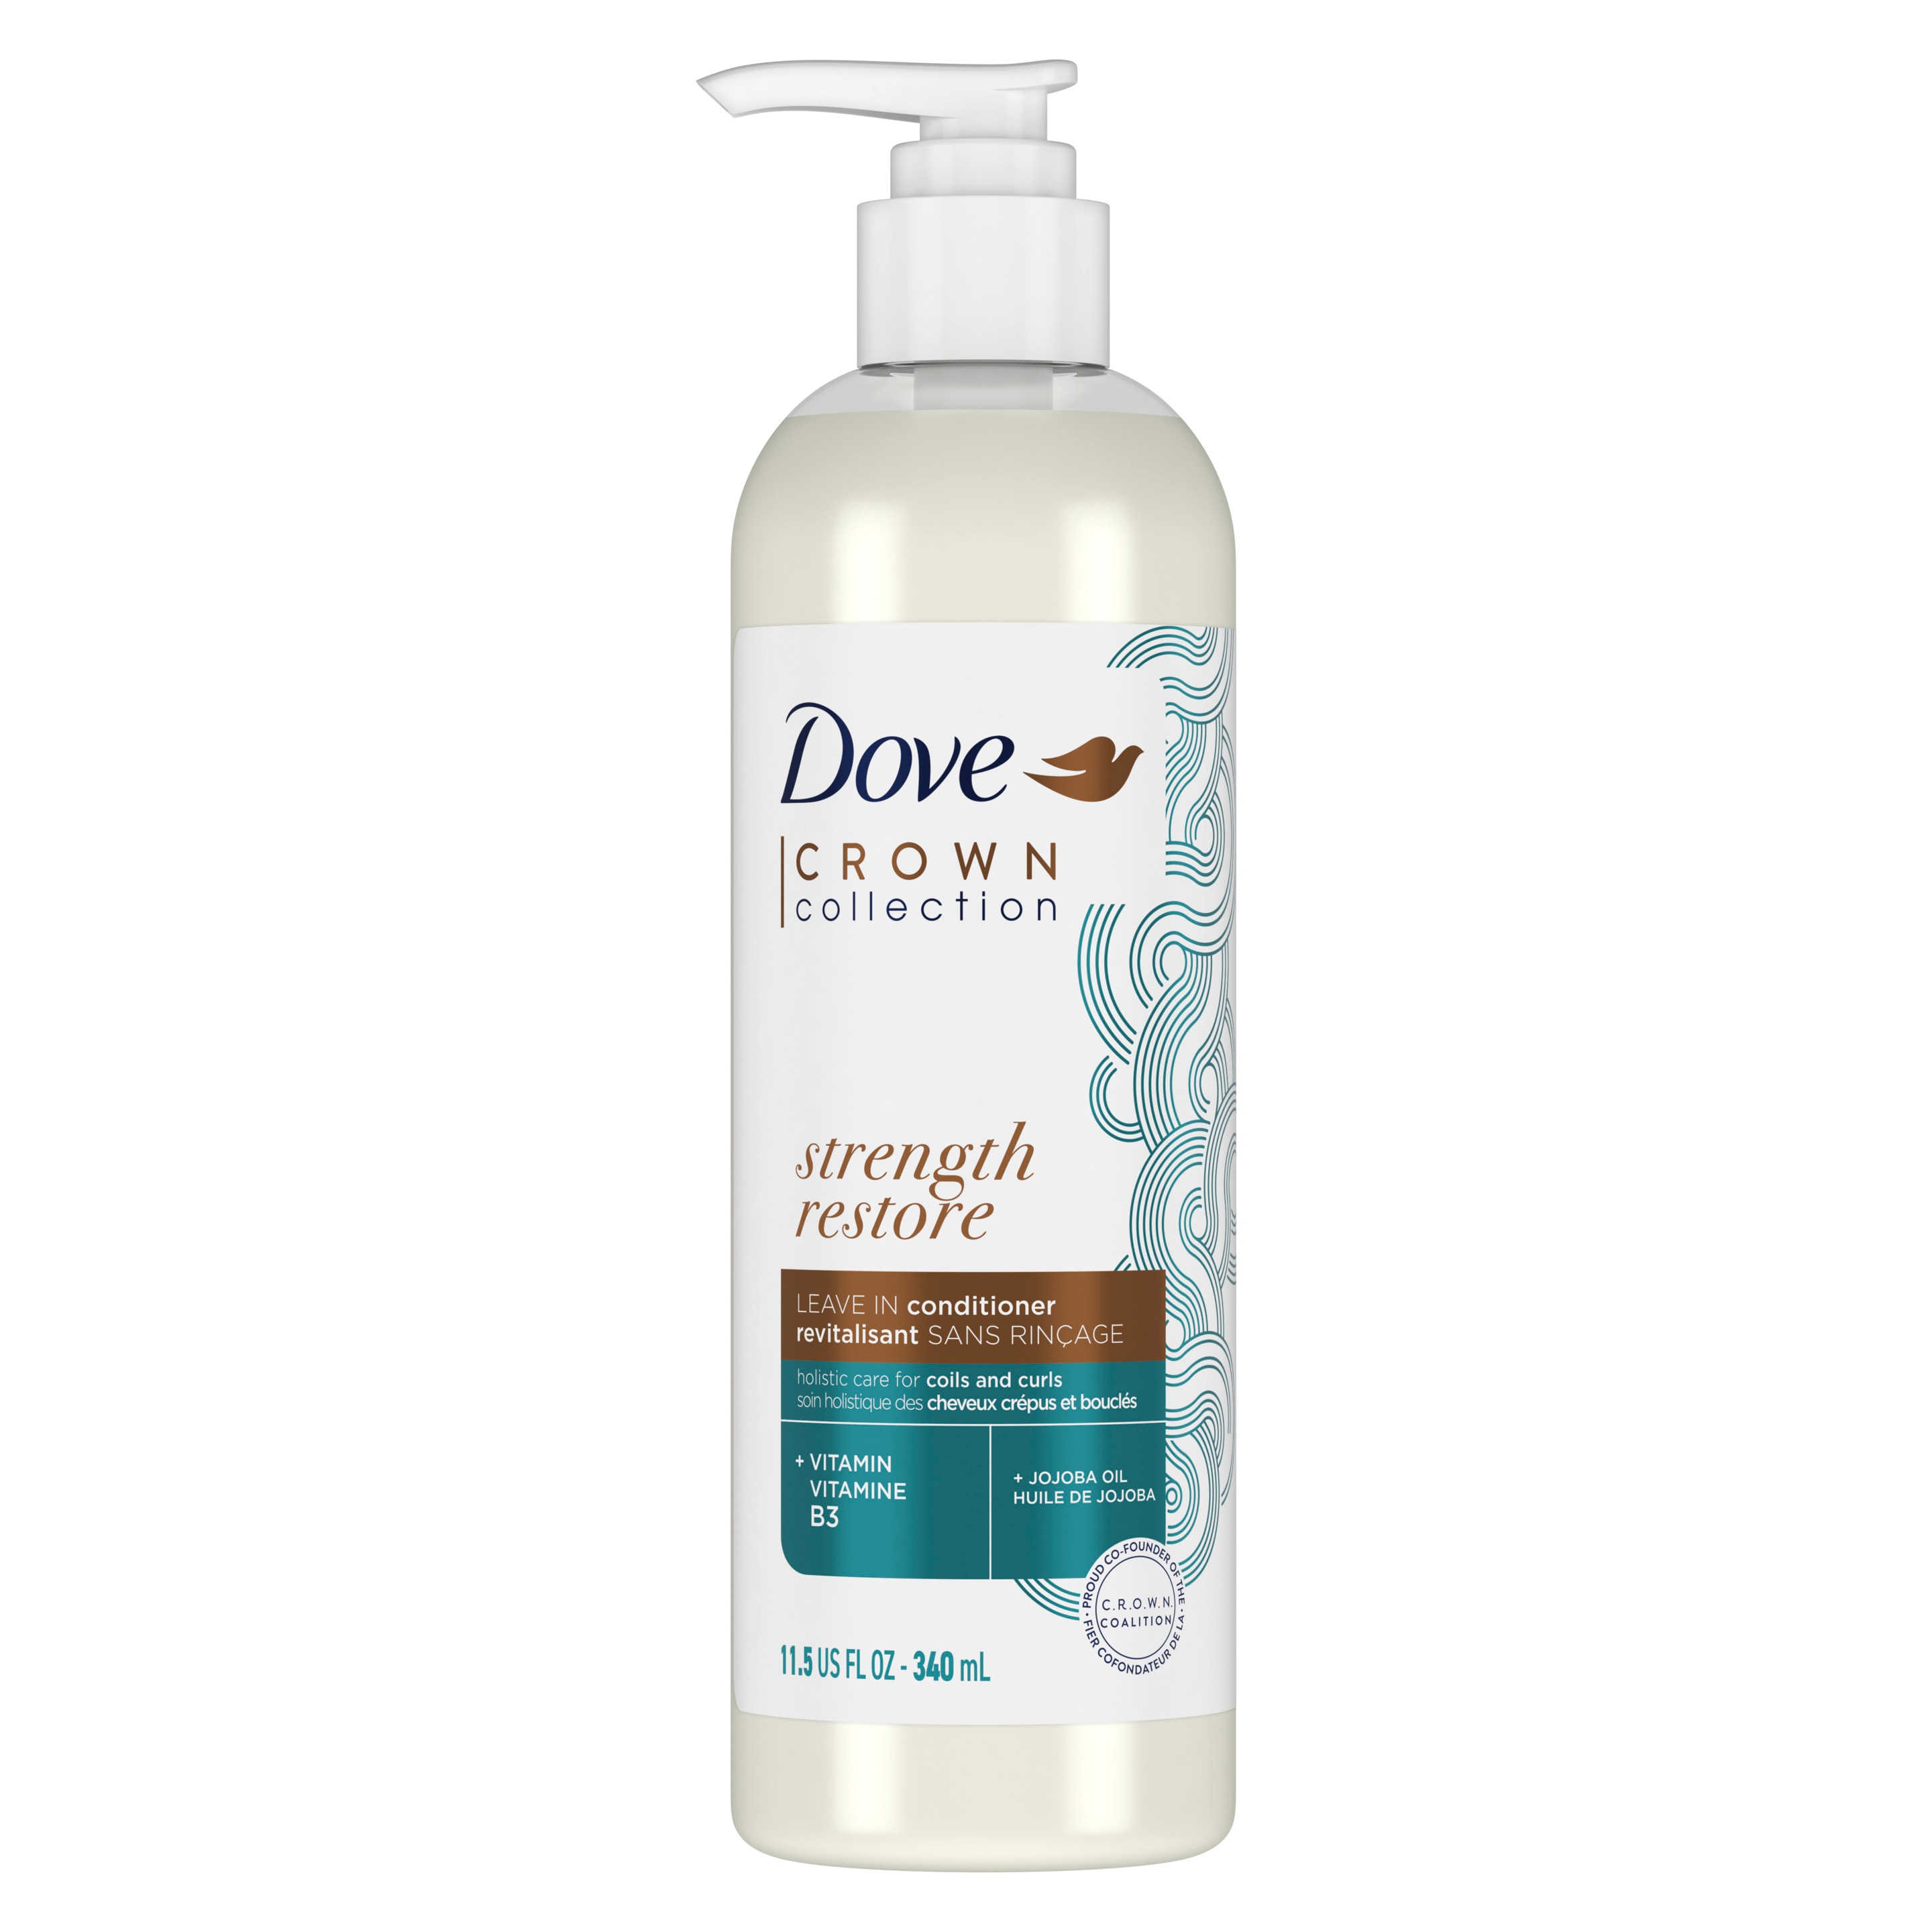 Dove Crown Collection Strength Restore Leave-in conditioner